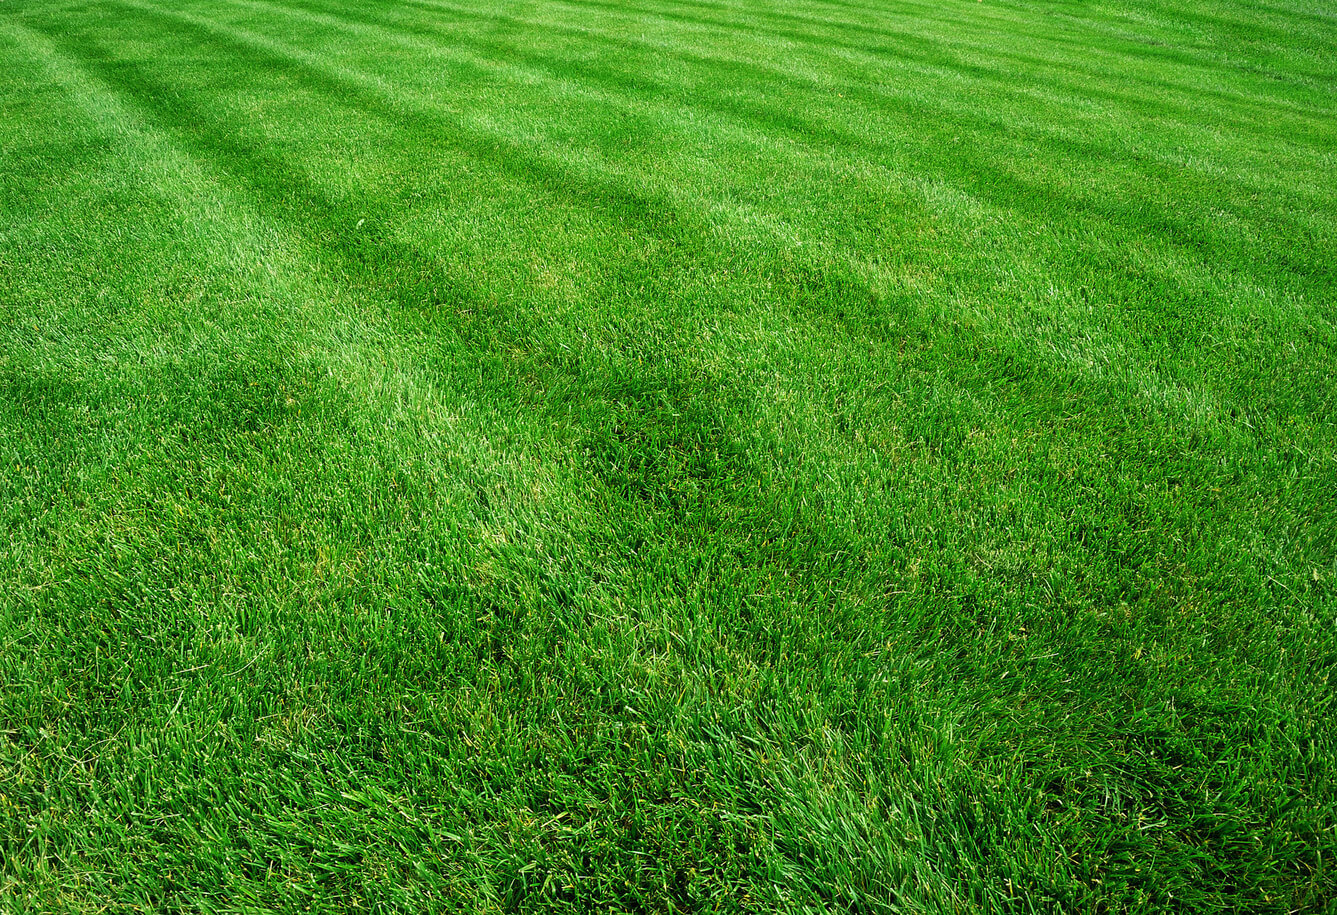 Lush green professional lawn maintenance. Unicutters lawn care we offer weekly and biweekly lawn cutting mowing services with high nitrogen iron lawn fertilizer packages, overseeding with premium grass seed mix and spring and fall cleanup services with deep core aeration, power raking